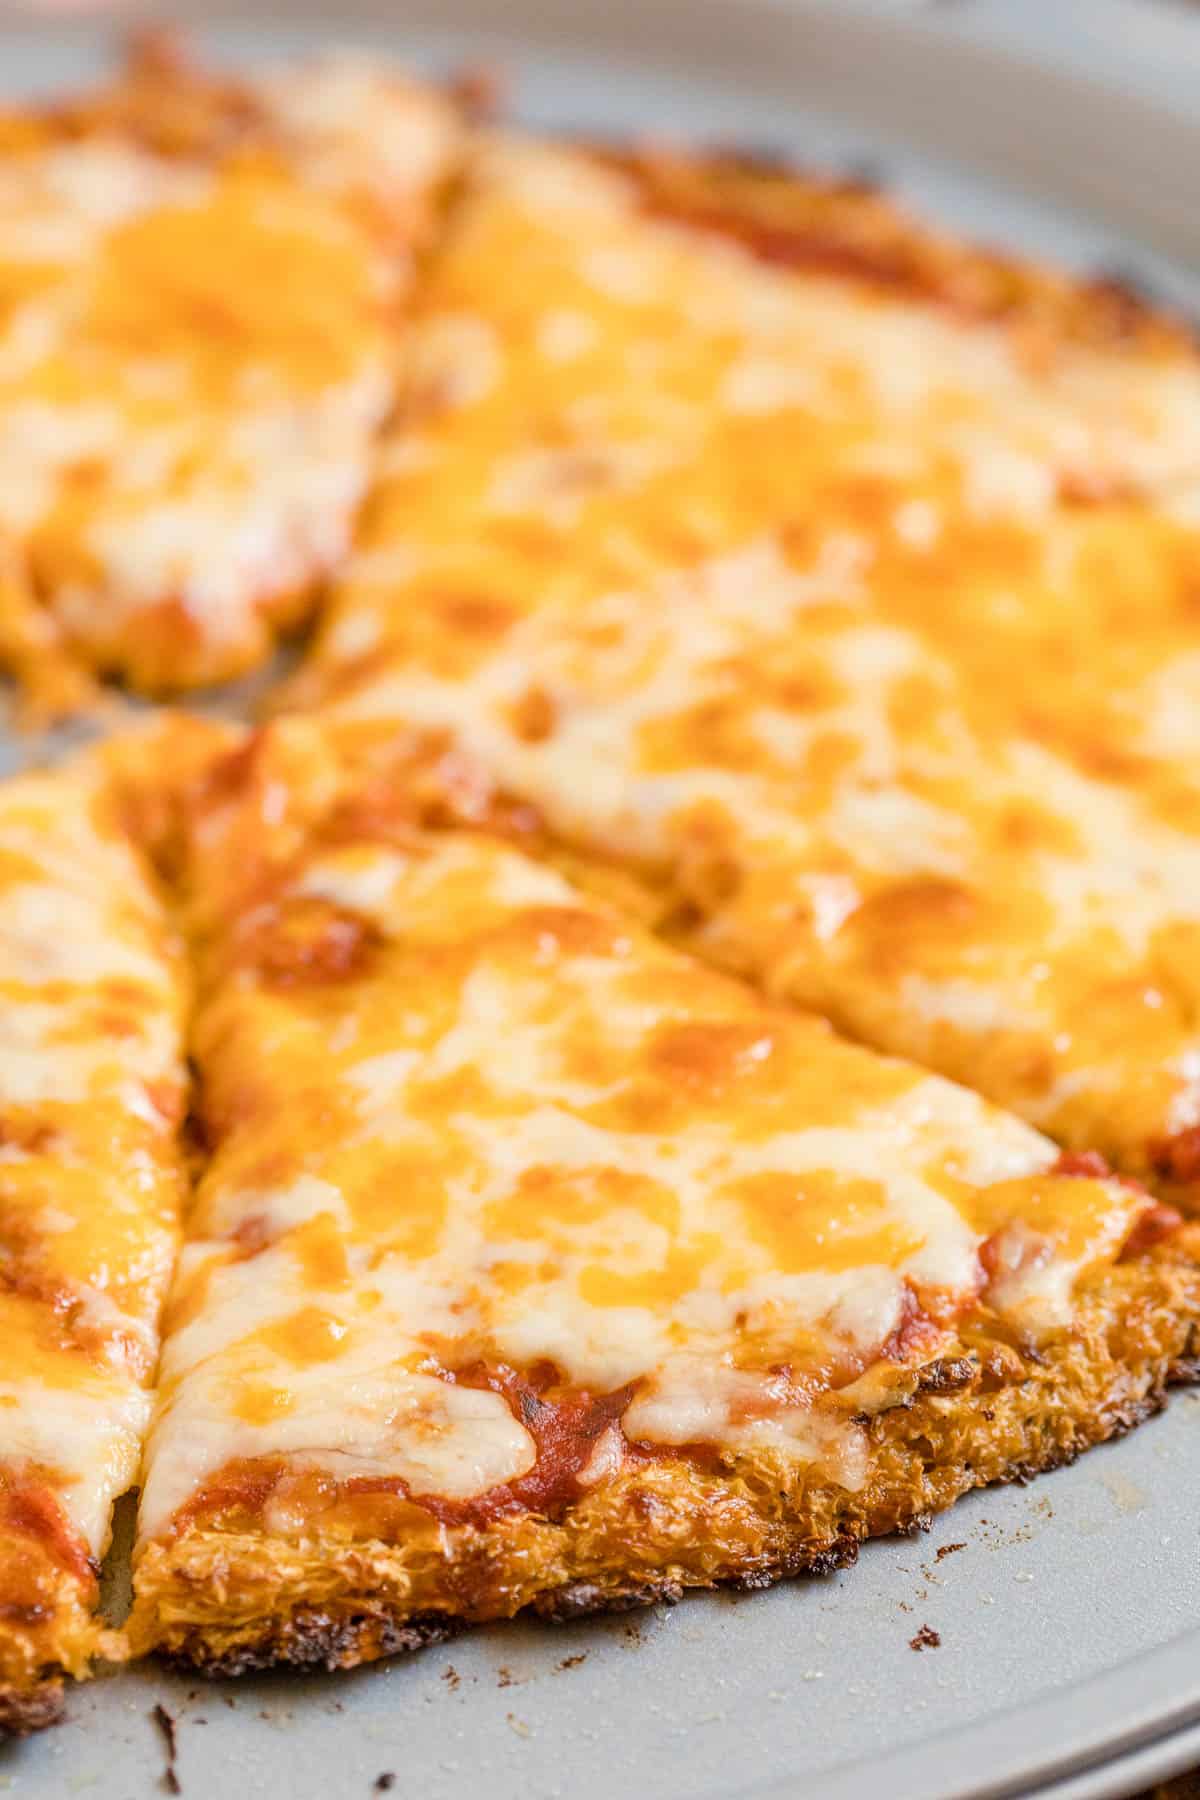 Cauliflower Pizza Crust - Perfect for keto and low-carb diets! This crispy crust is made from veggies and cheese and topped with your favorite pizza toppings.